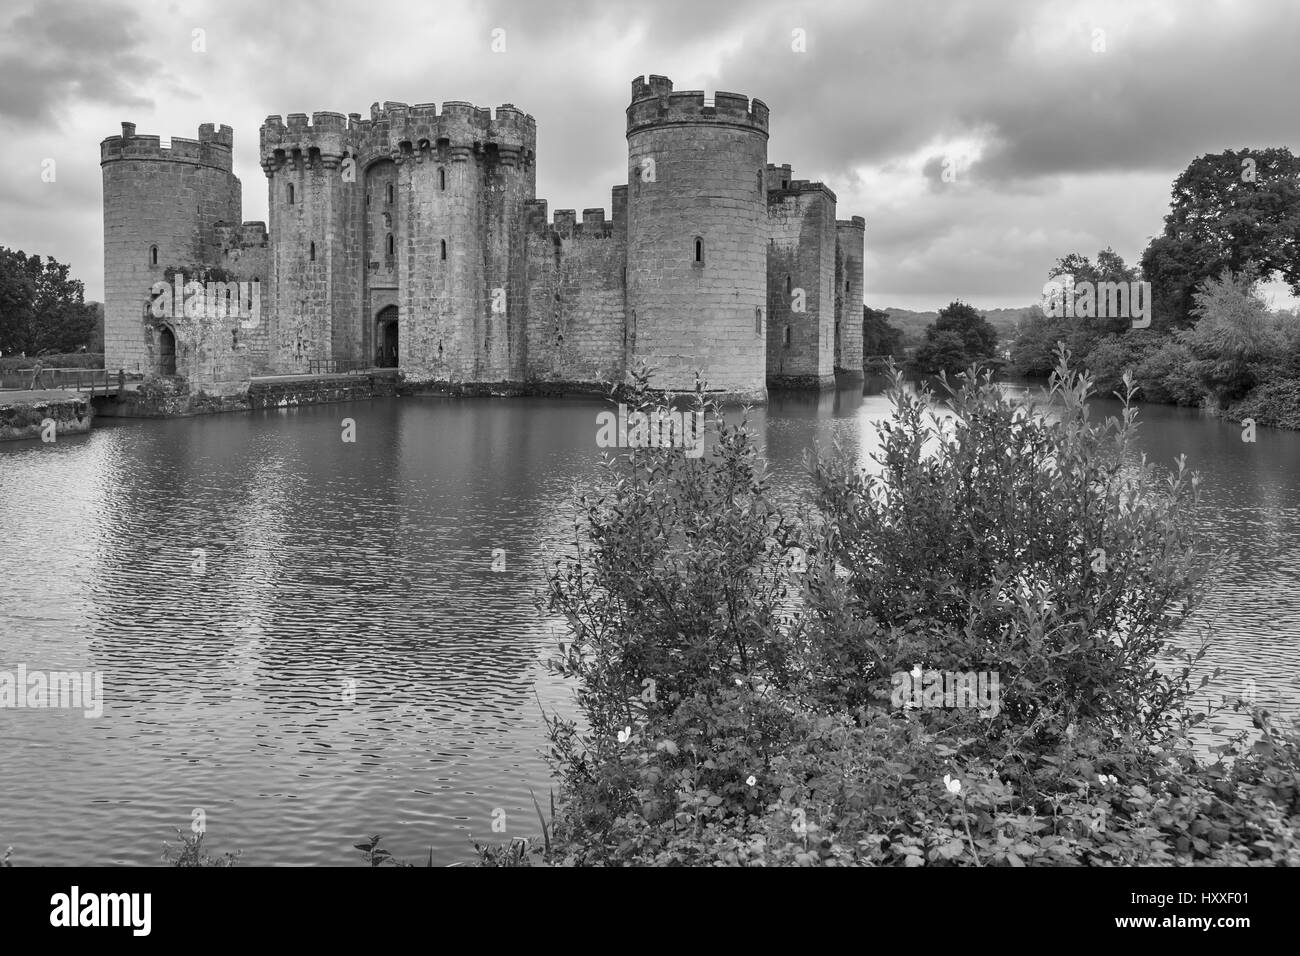 Bodiam Castle, East Sussex, England, UK: 14th century moated castle ruins.  Black and white version Stock Photo